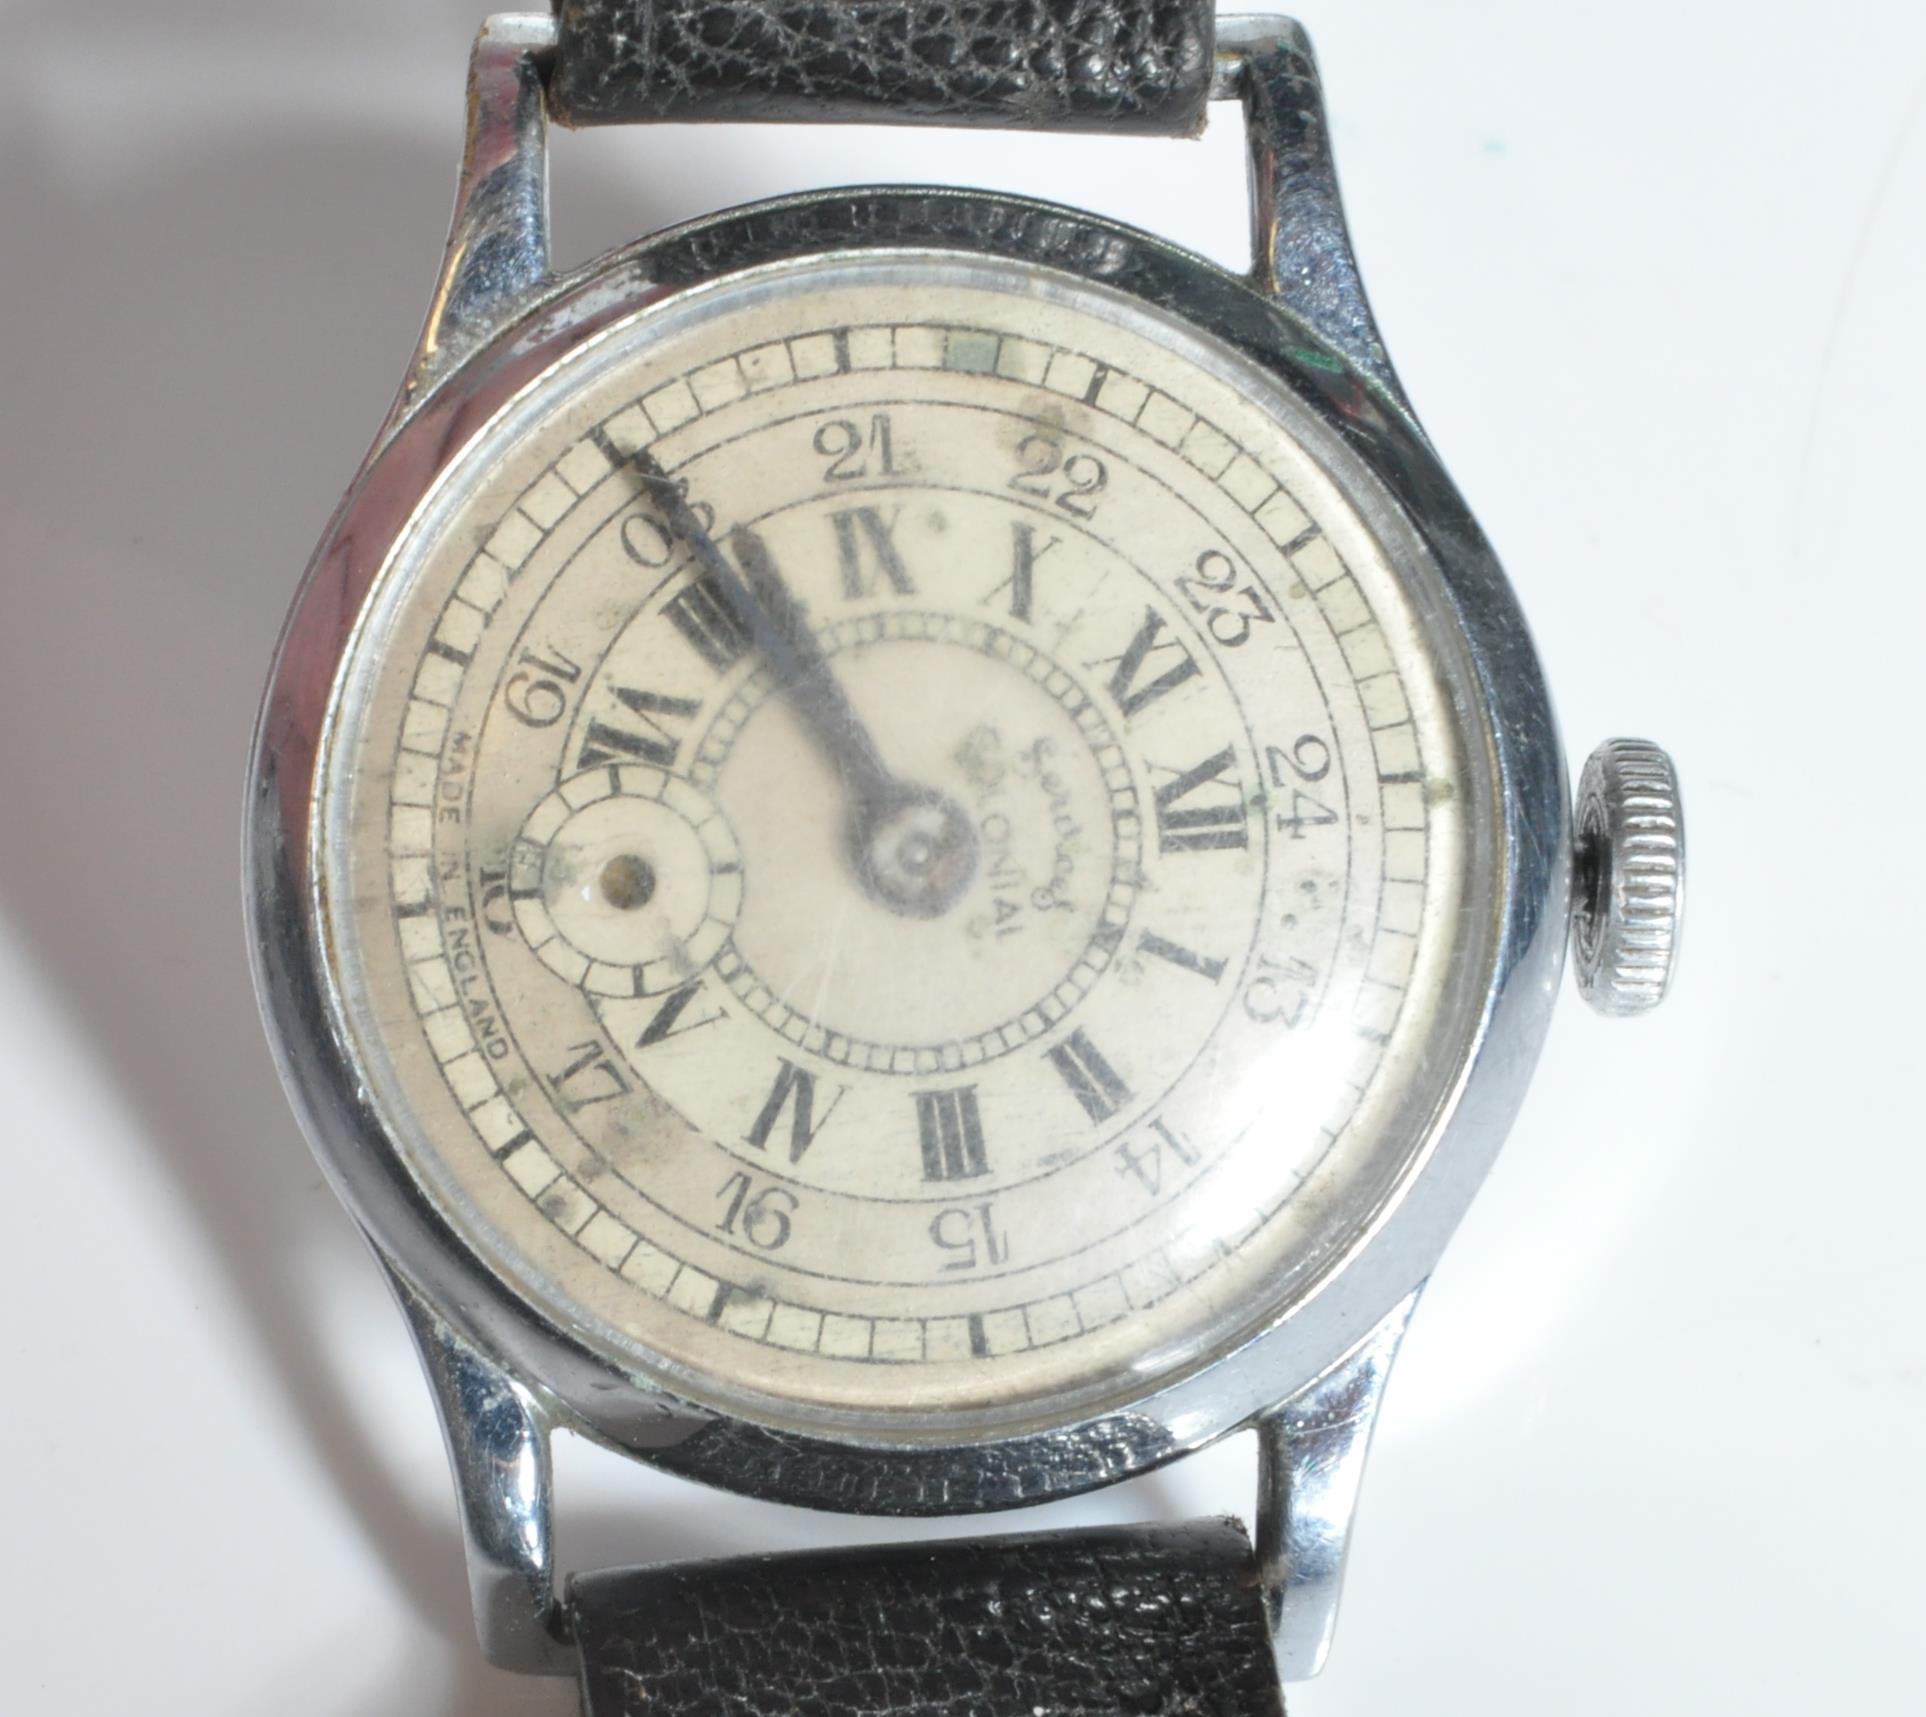 MID 20TH CENTURY SERVICES COLONIAL GENTLEMEN'S WRISTWATCH - Image 6 of 11